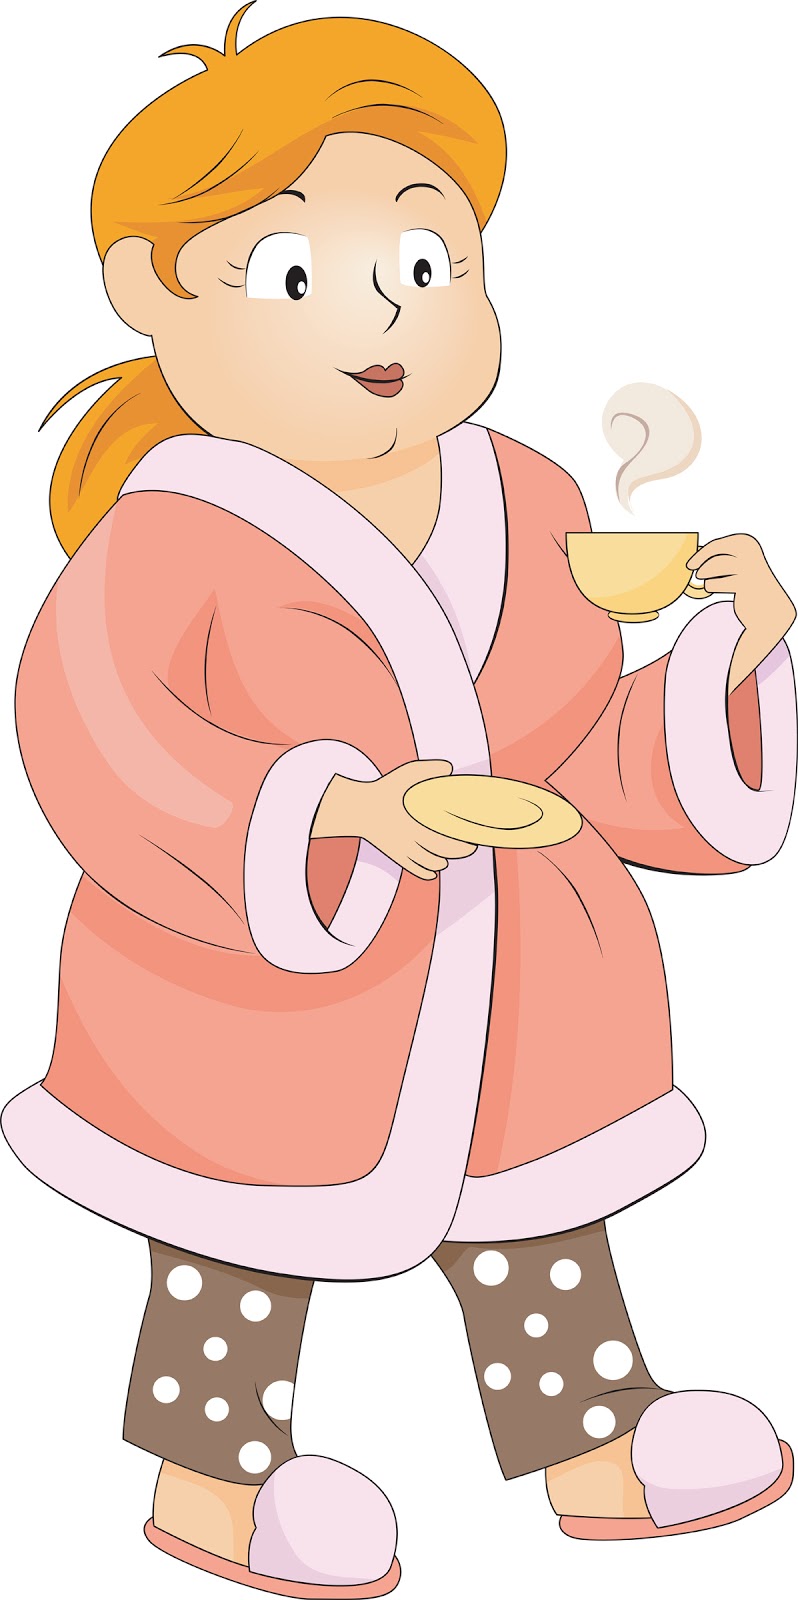 Put On Pajamas Clipart Another Thing Have To Change